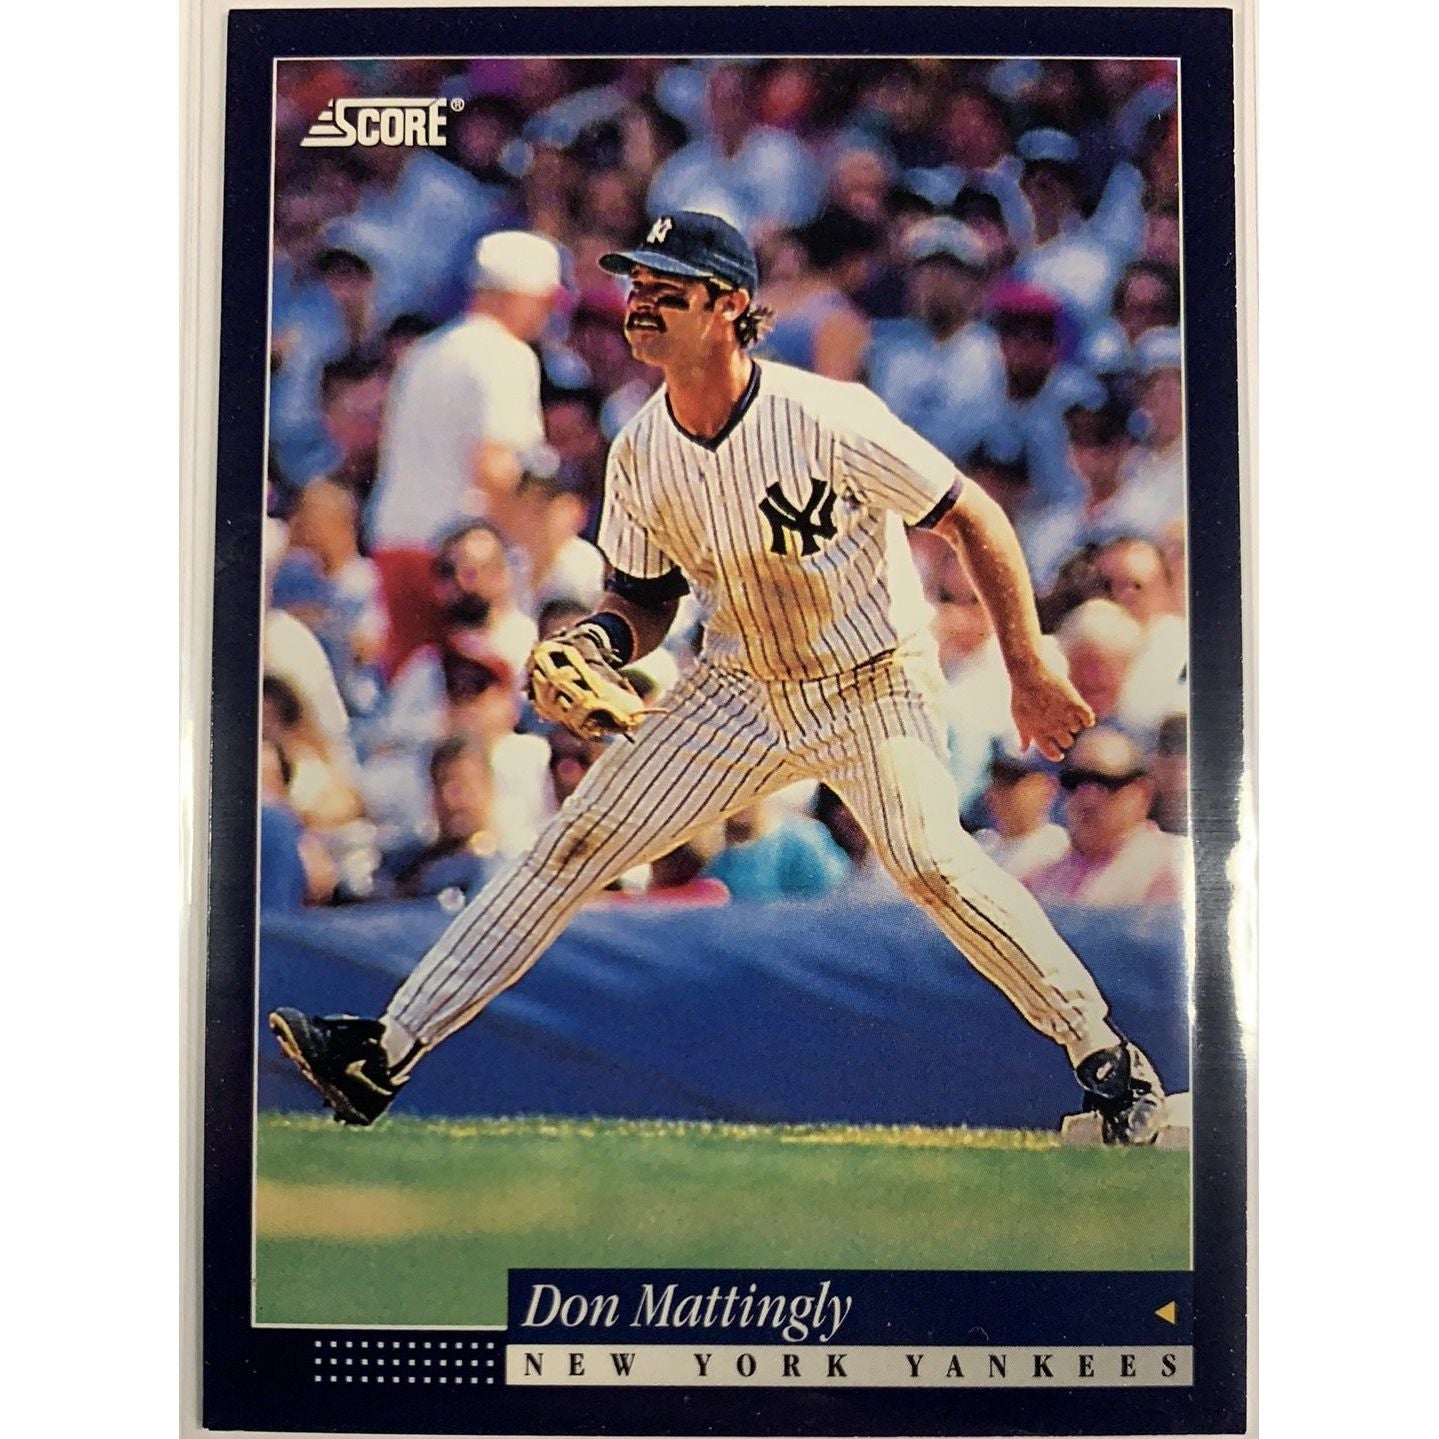  1993 Score Don Mattingly #23  Local Legends Cards & Collectibles